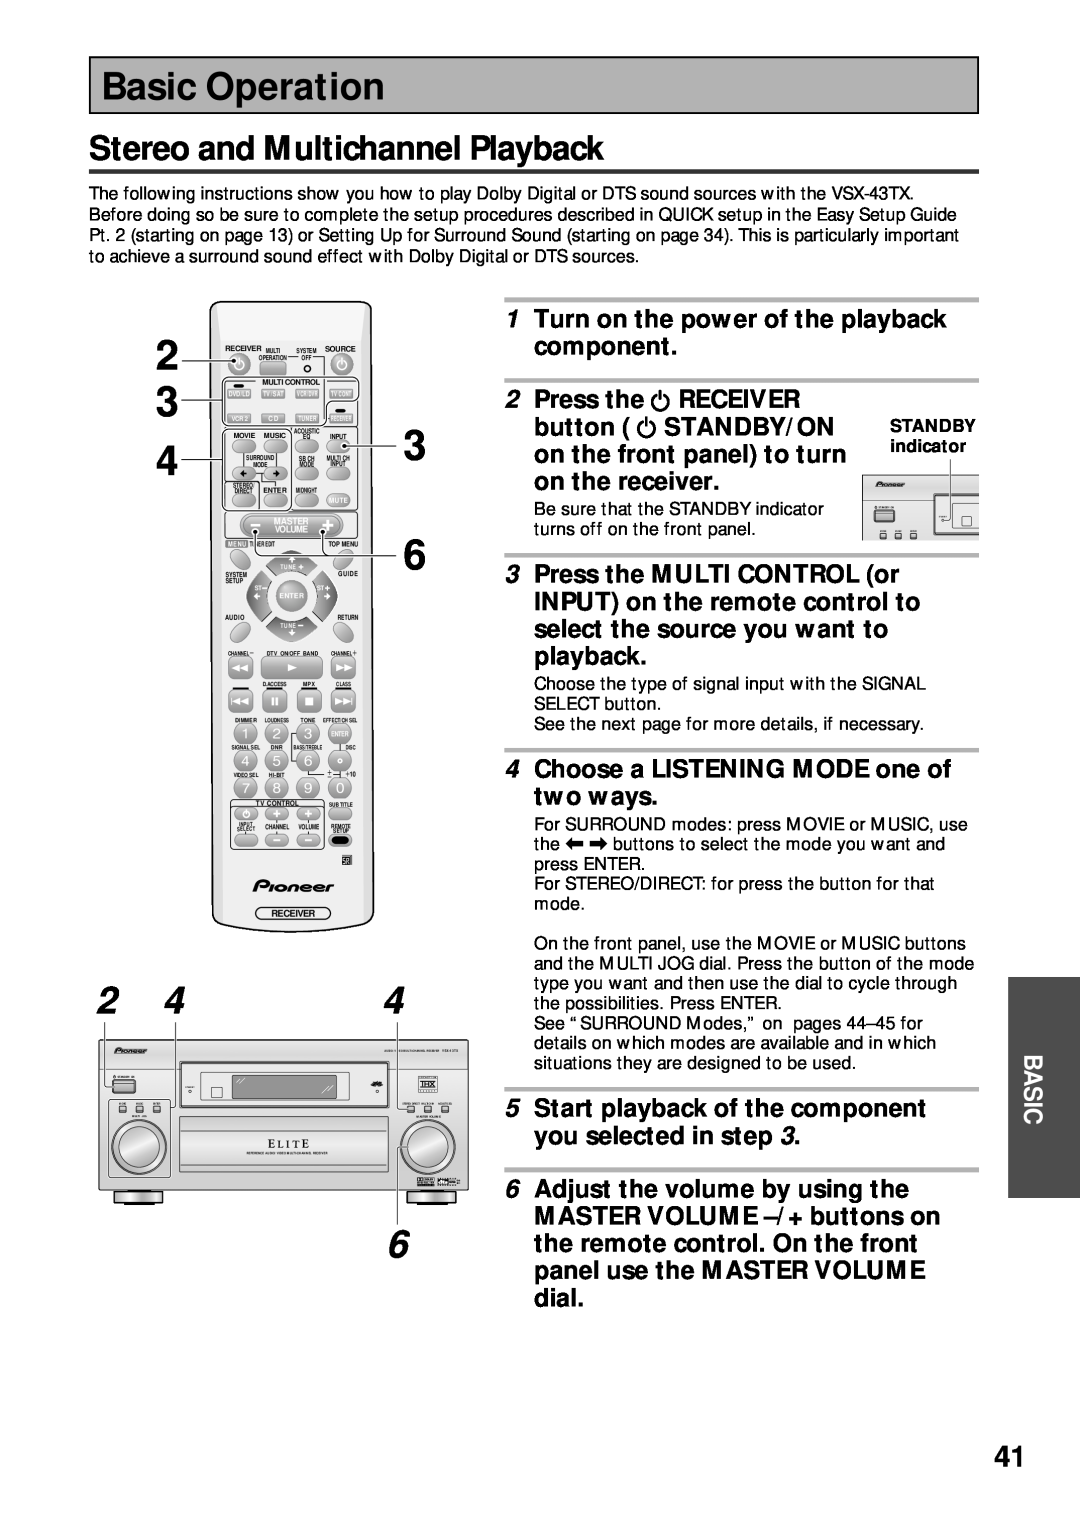 Pioneer VSX-43TX Basic Operation, Stereo and Multichannel Playback, 1Turn on the power of the playback component, Master 